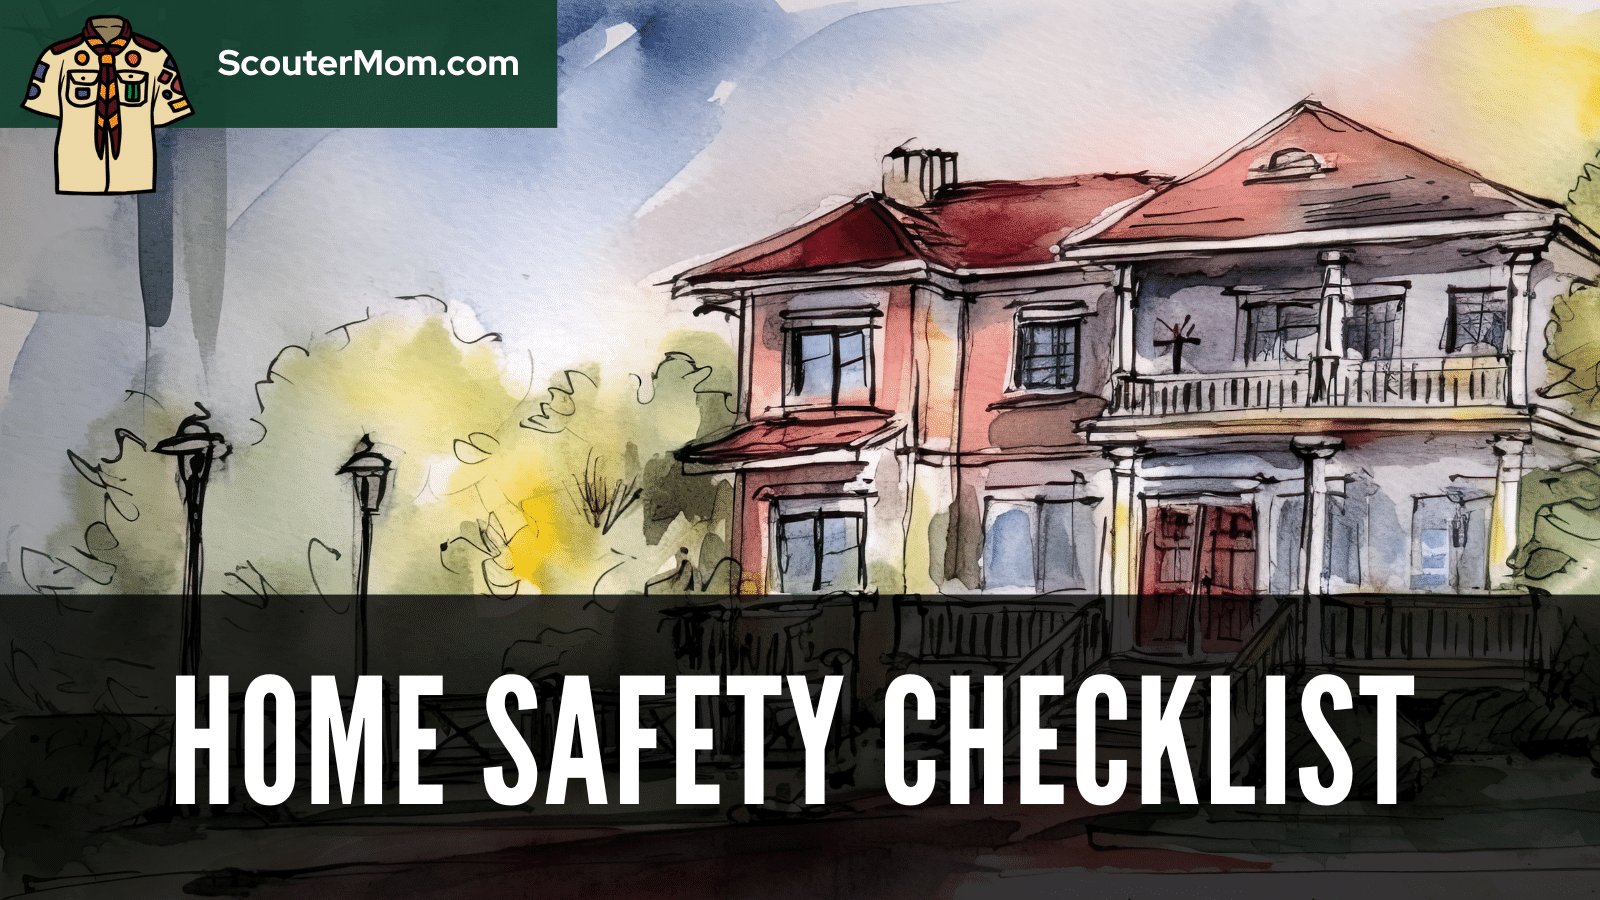 Home Safety Checklist for Cub Scouts